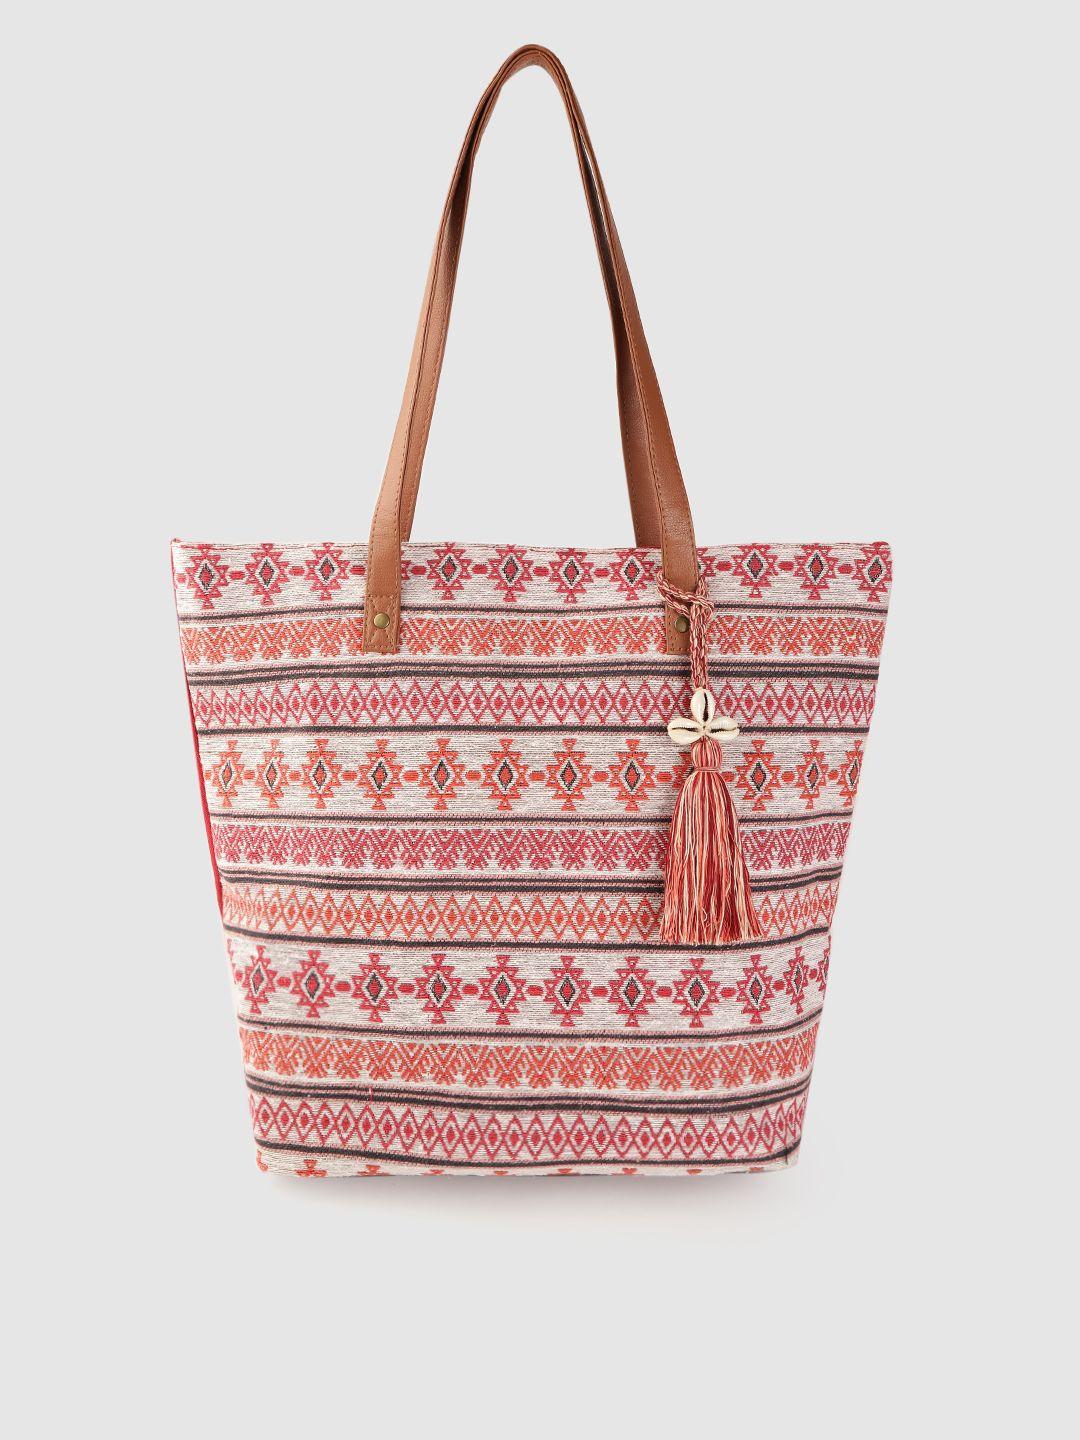 anouk off-white & red geometric patterned shopper tote bag with tasselled detail